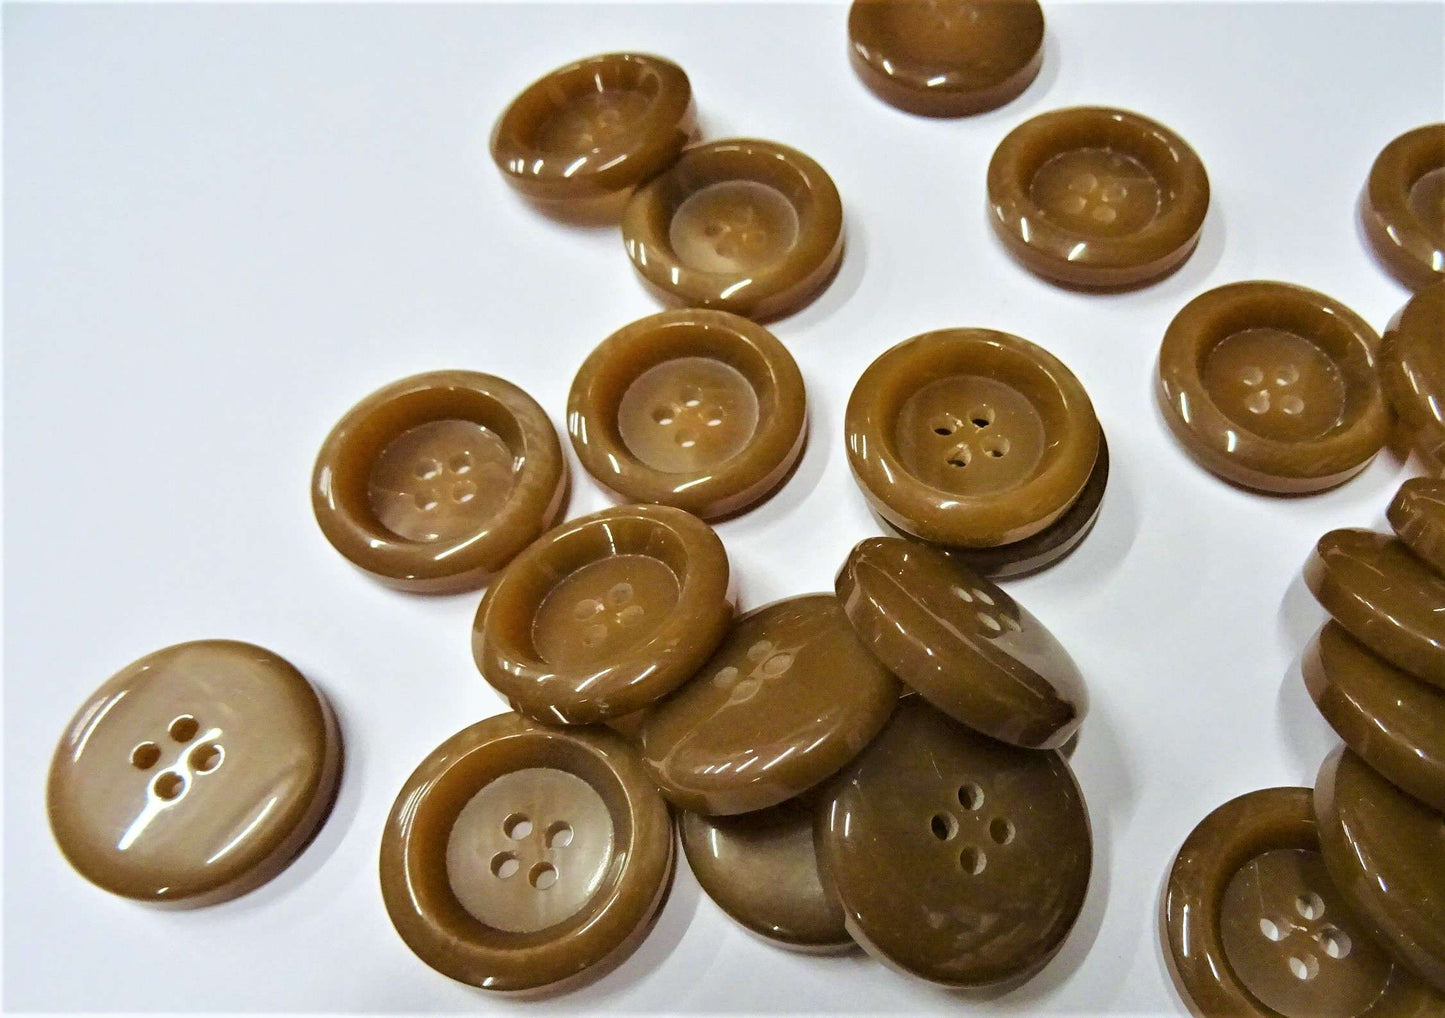 25 mid brown shiny 4 hole coat buttons size 25mm clearance